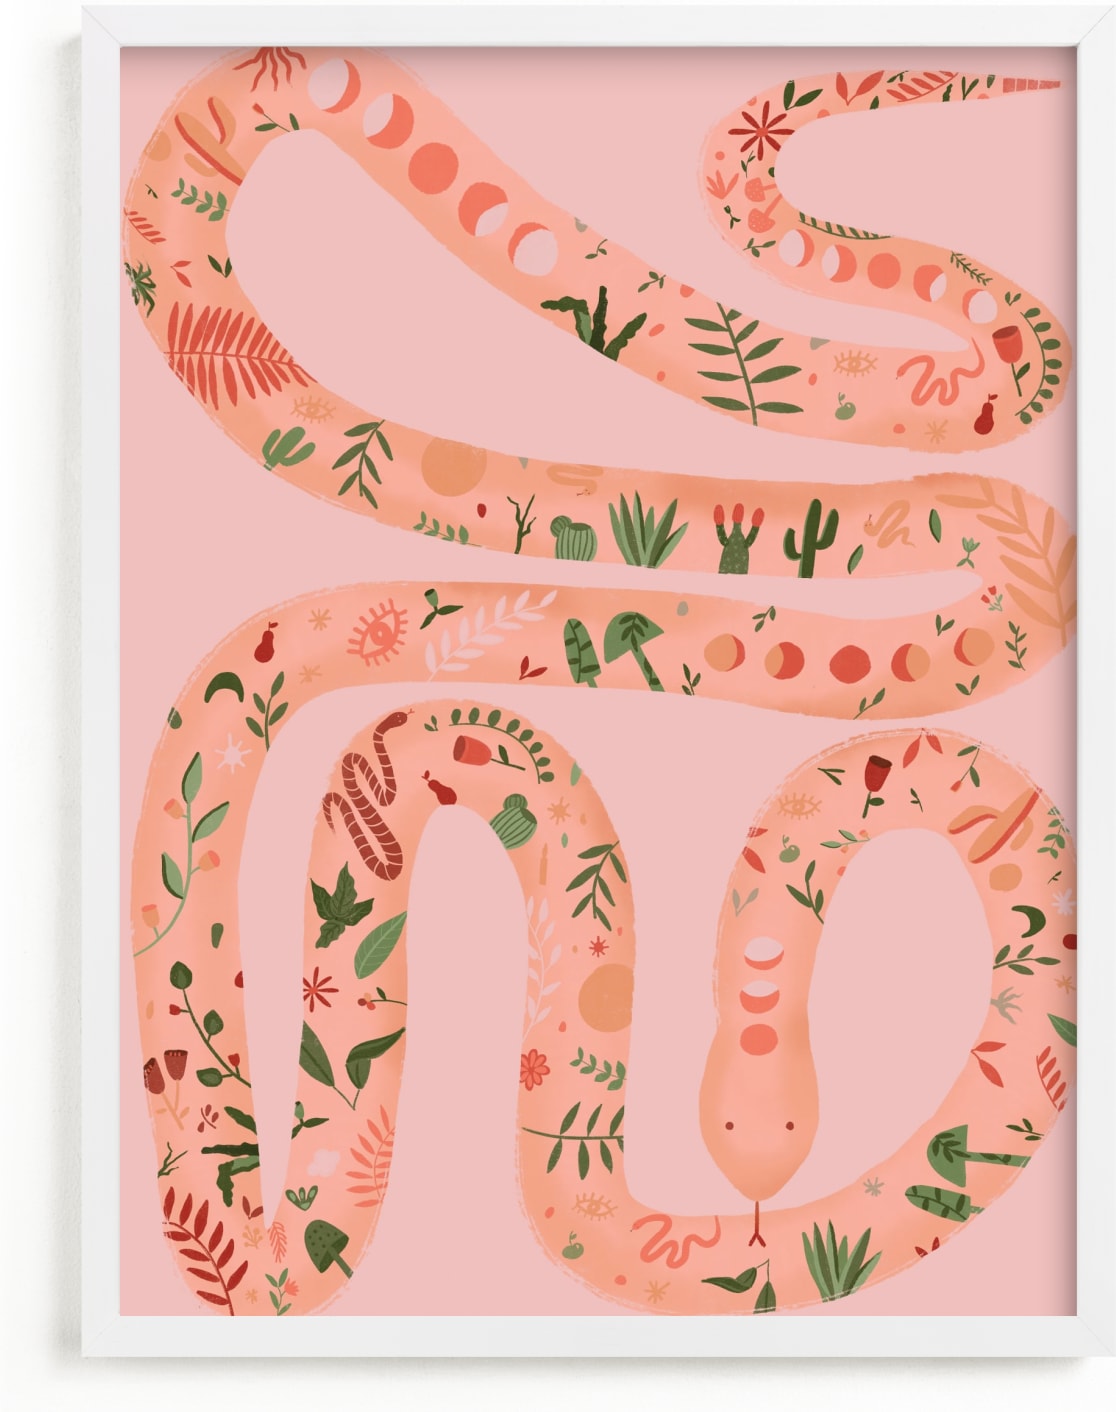 This is a pink art by Juliana Moreira-Callahan called Folk Floral Snake.